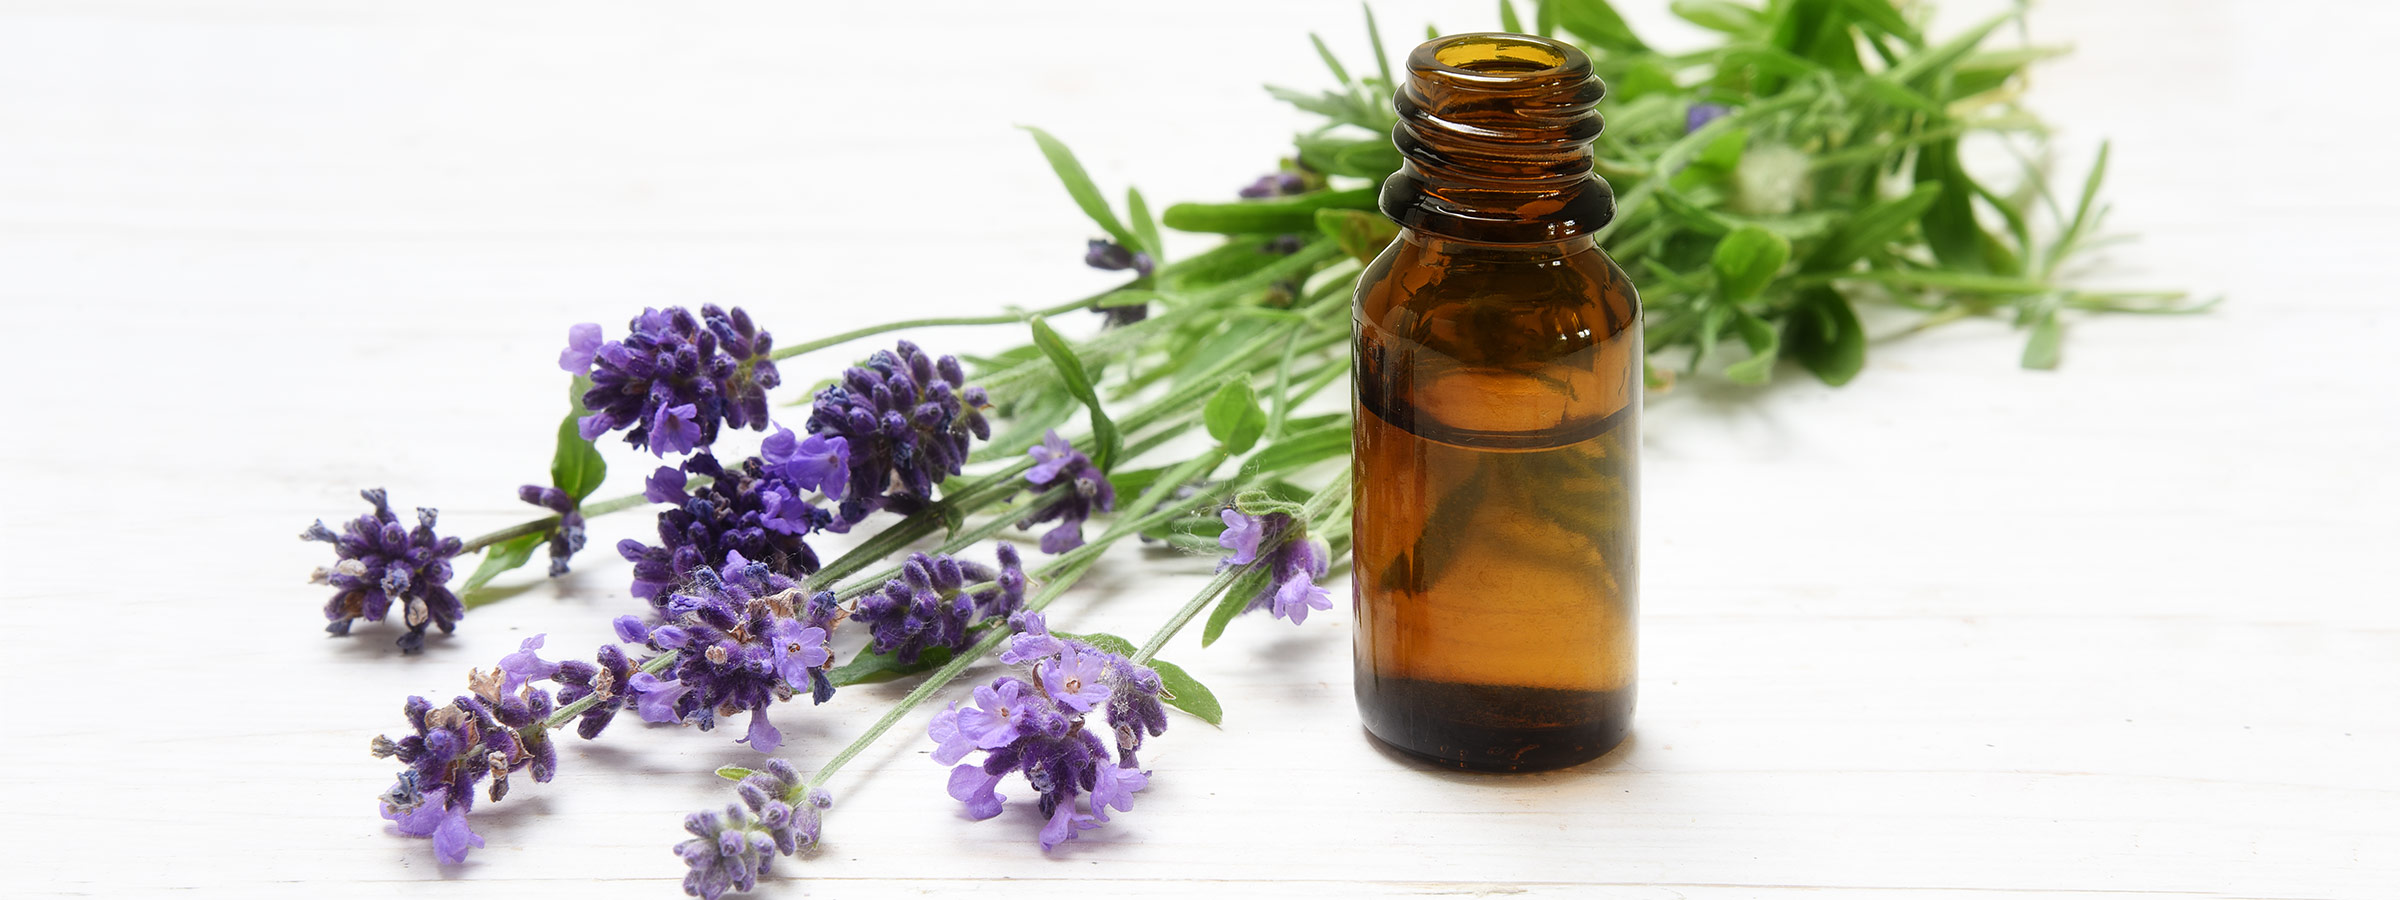 We Tested Other Brands: Exercise Caution When Buying Essential Oils